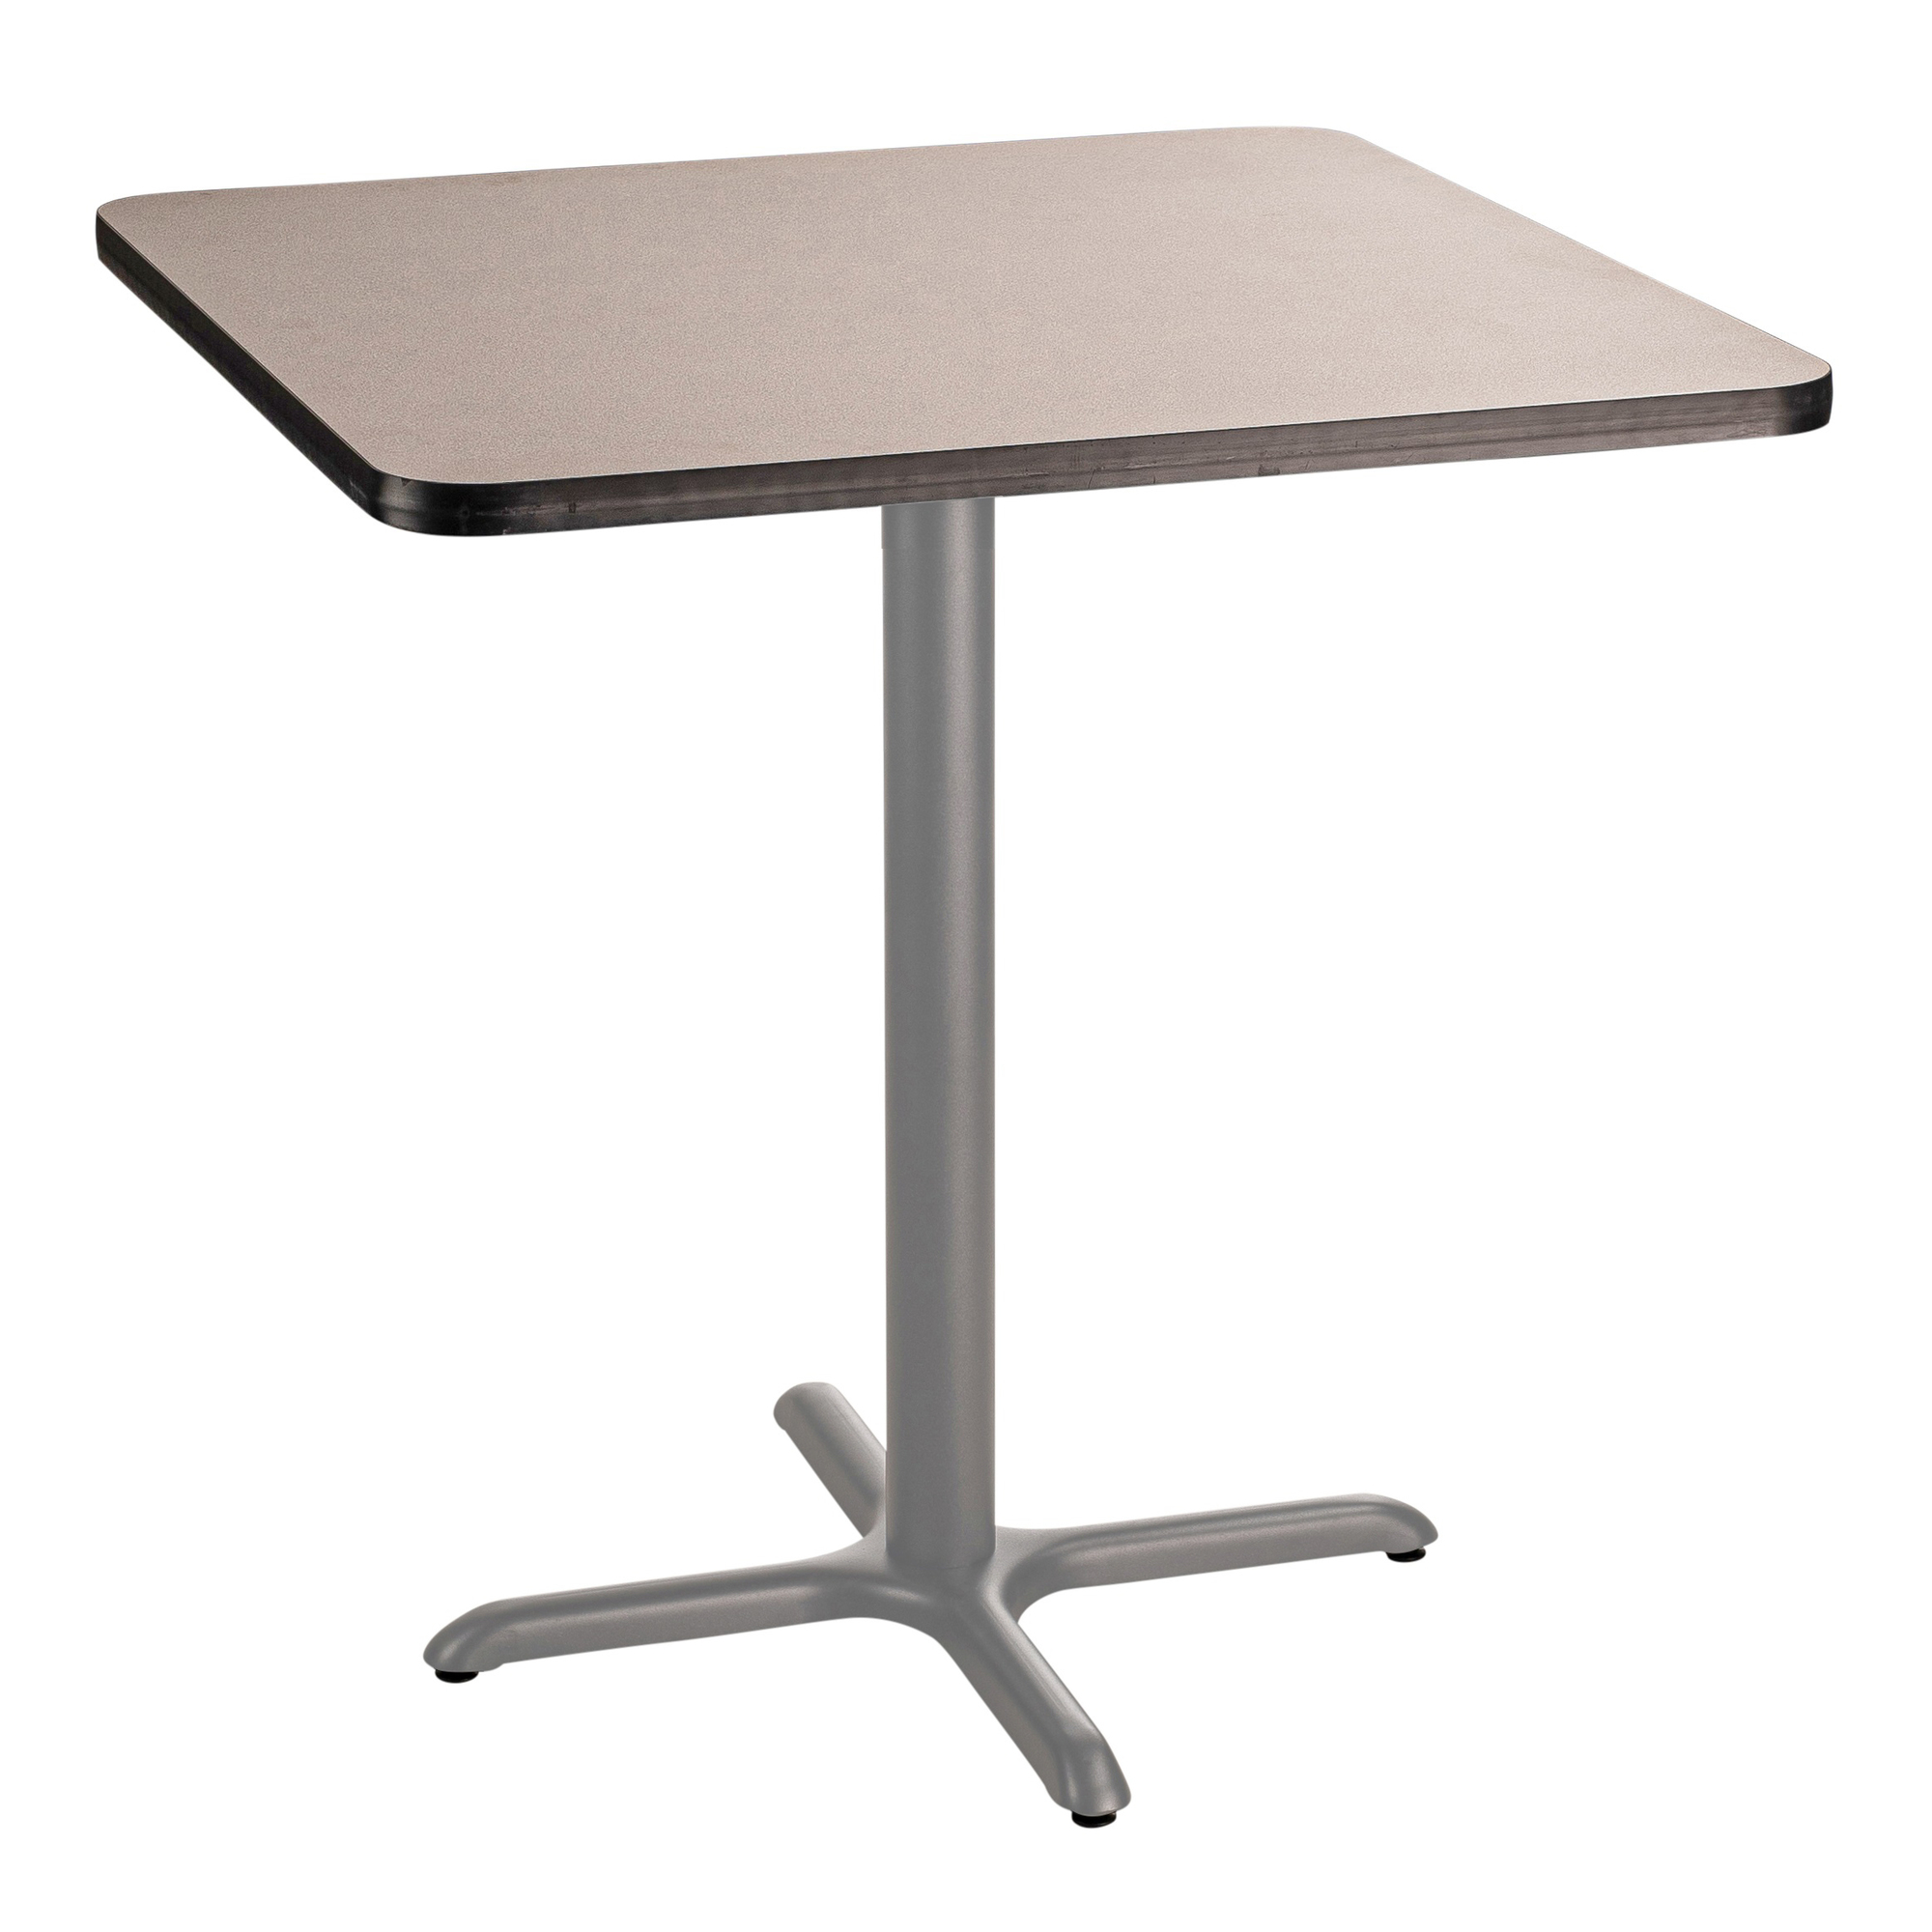 "National Public Seating, Cafe Table, 36x36x36 Square ""X"" Base, Height 36 in, Model CTG33636XCPBTMGY"